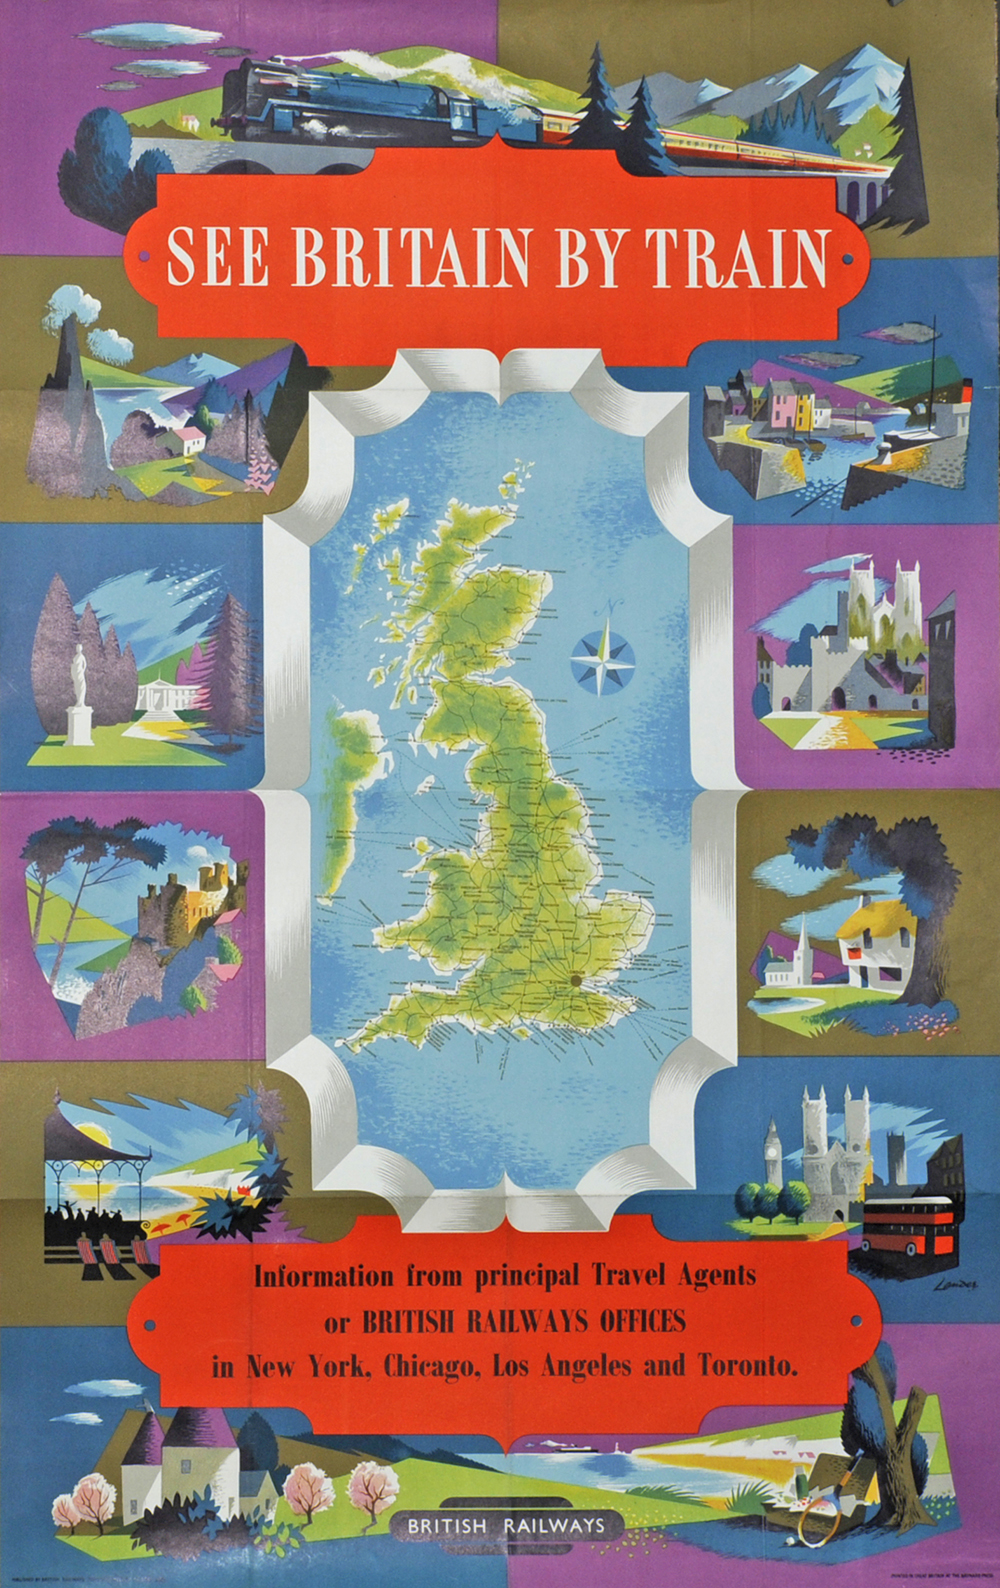 Poster 'See Britain by Train, British Railways, Information from principal travel agents or BR